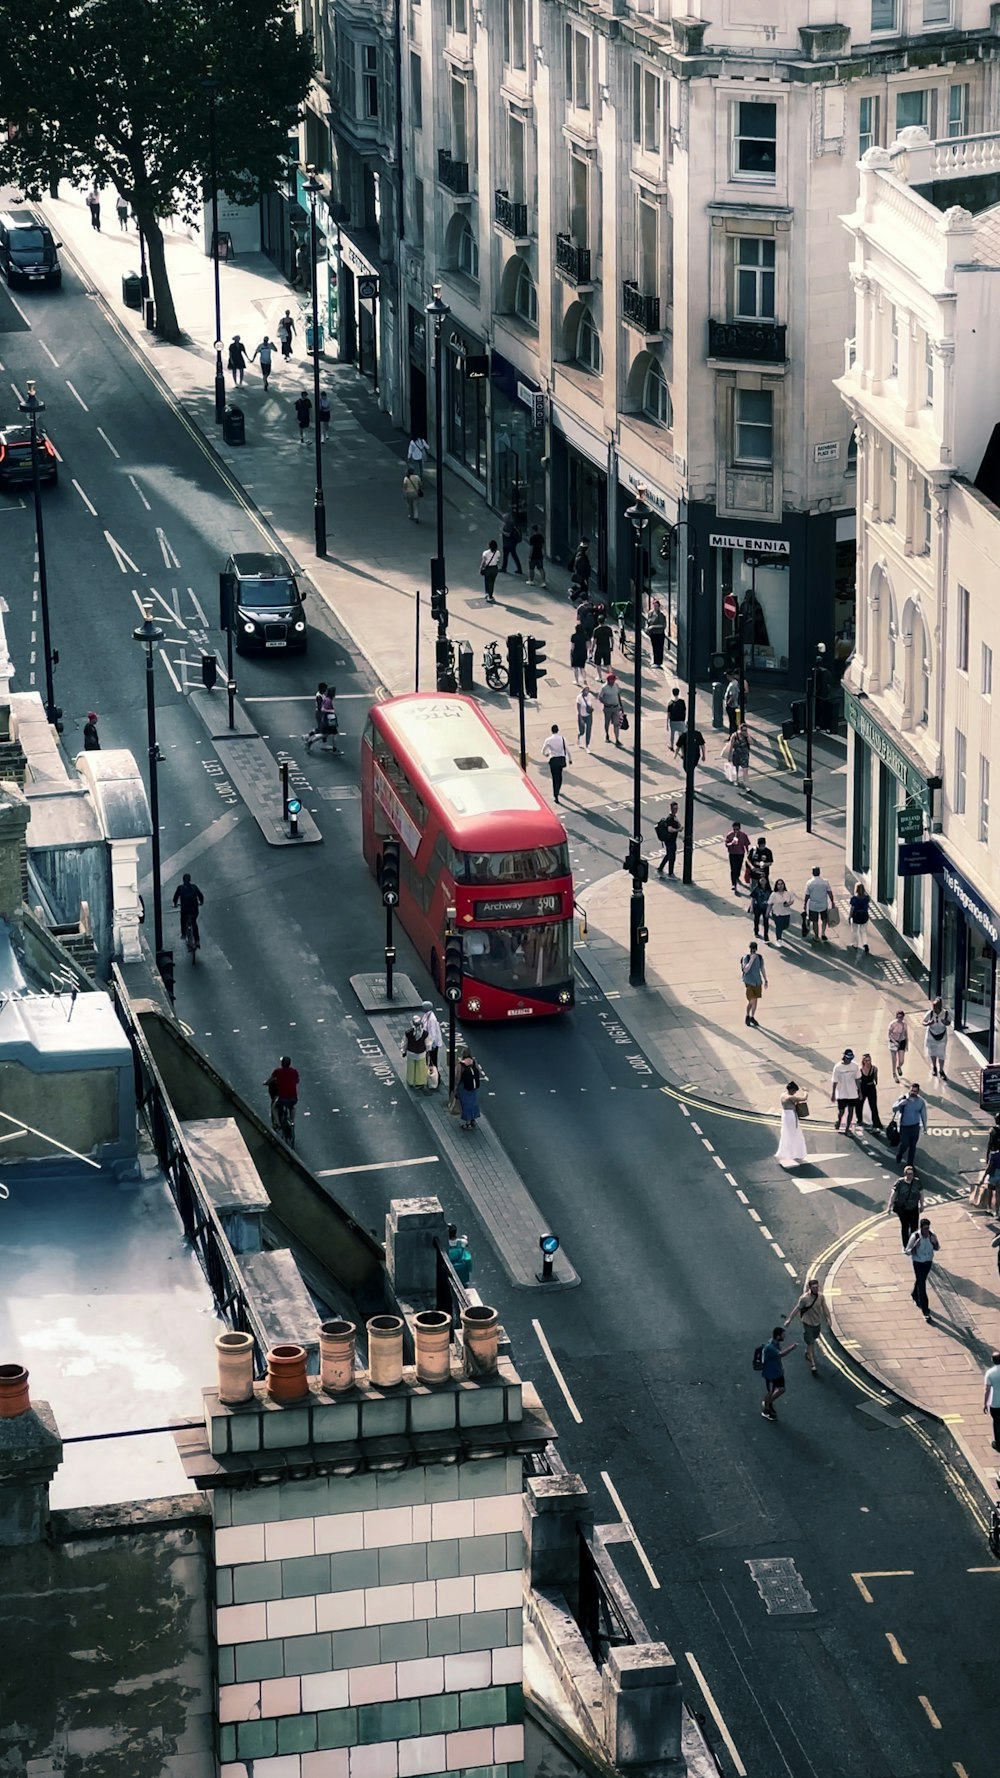 a red double decker bus driving down a city street